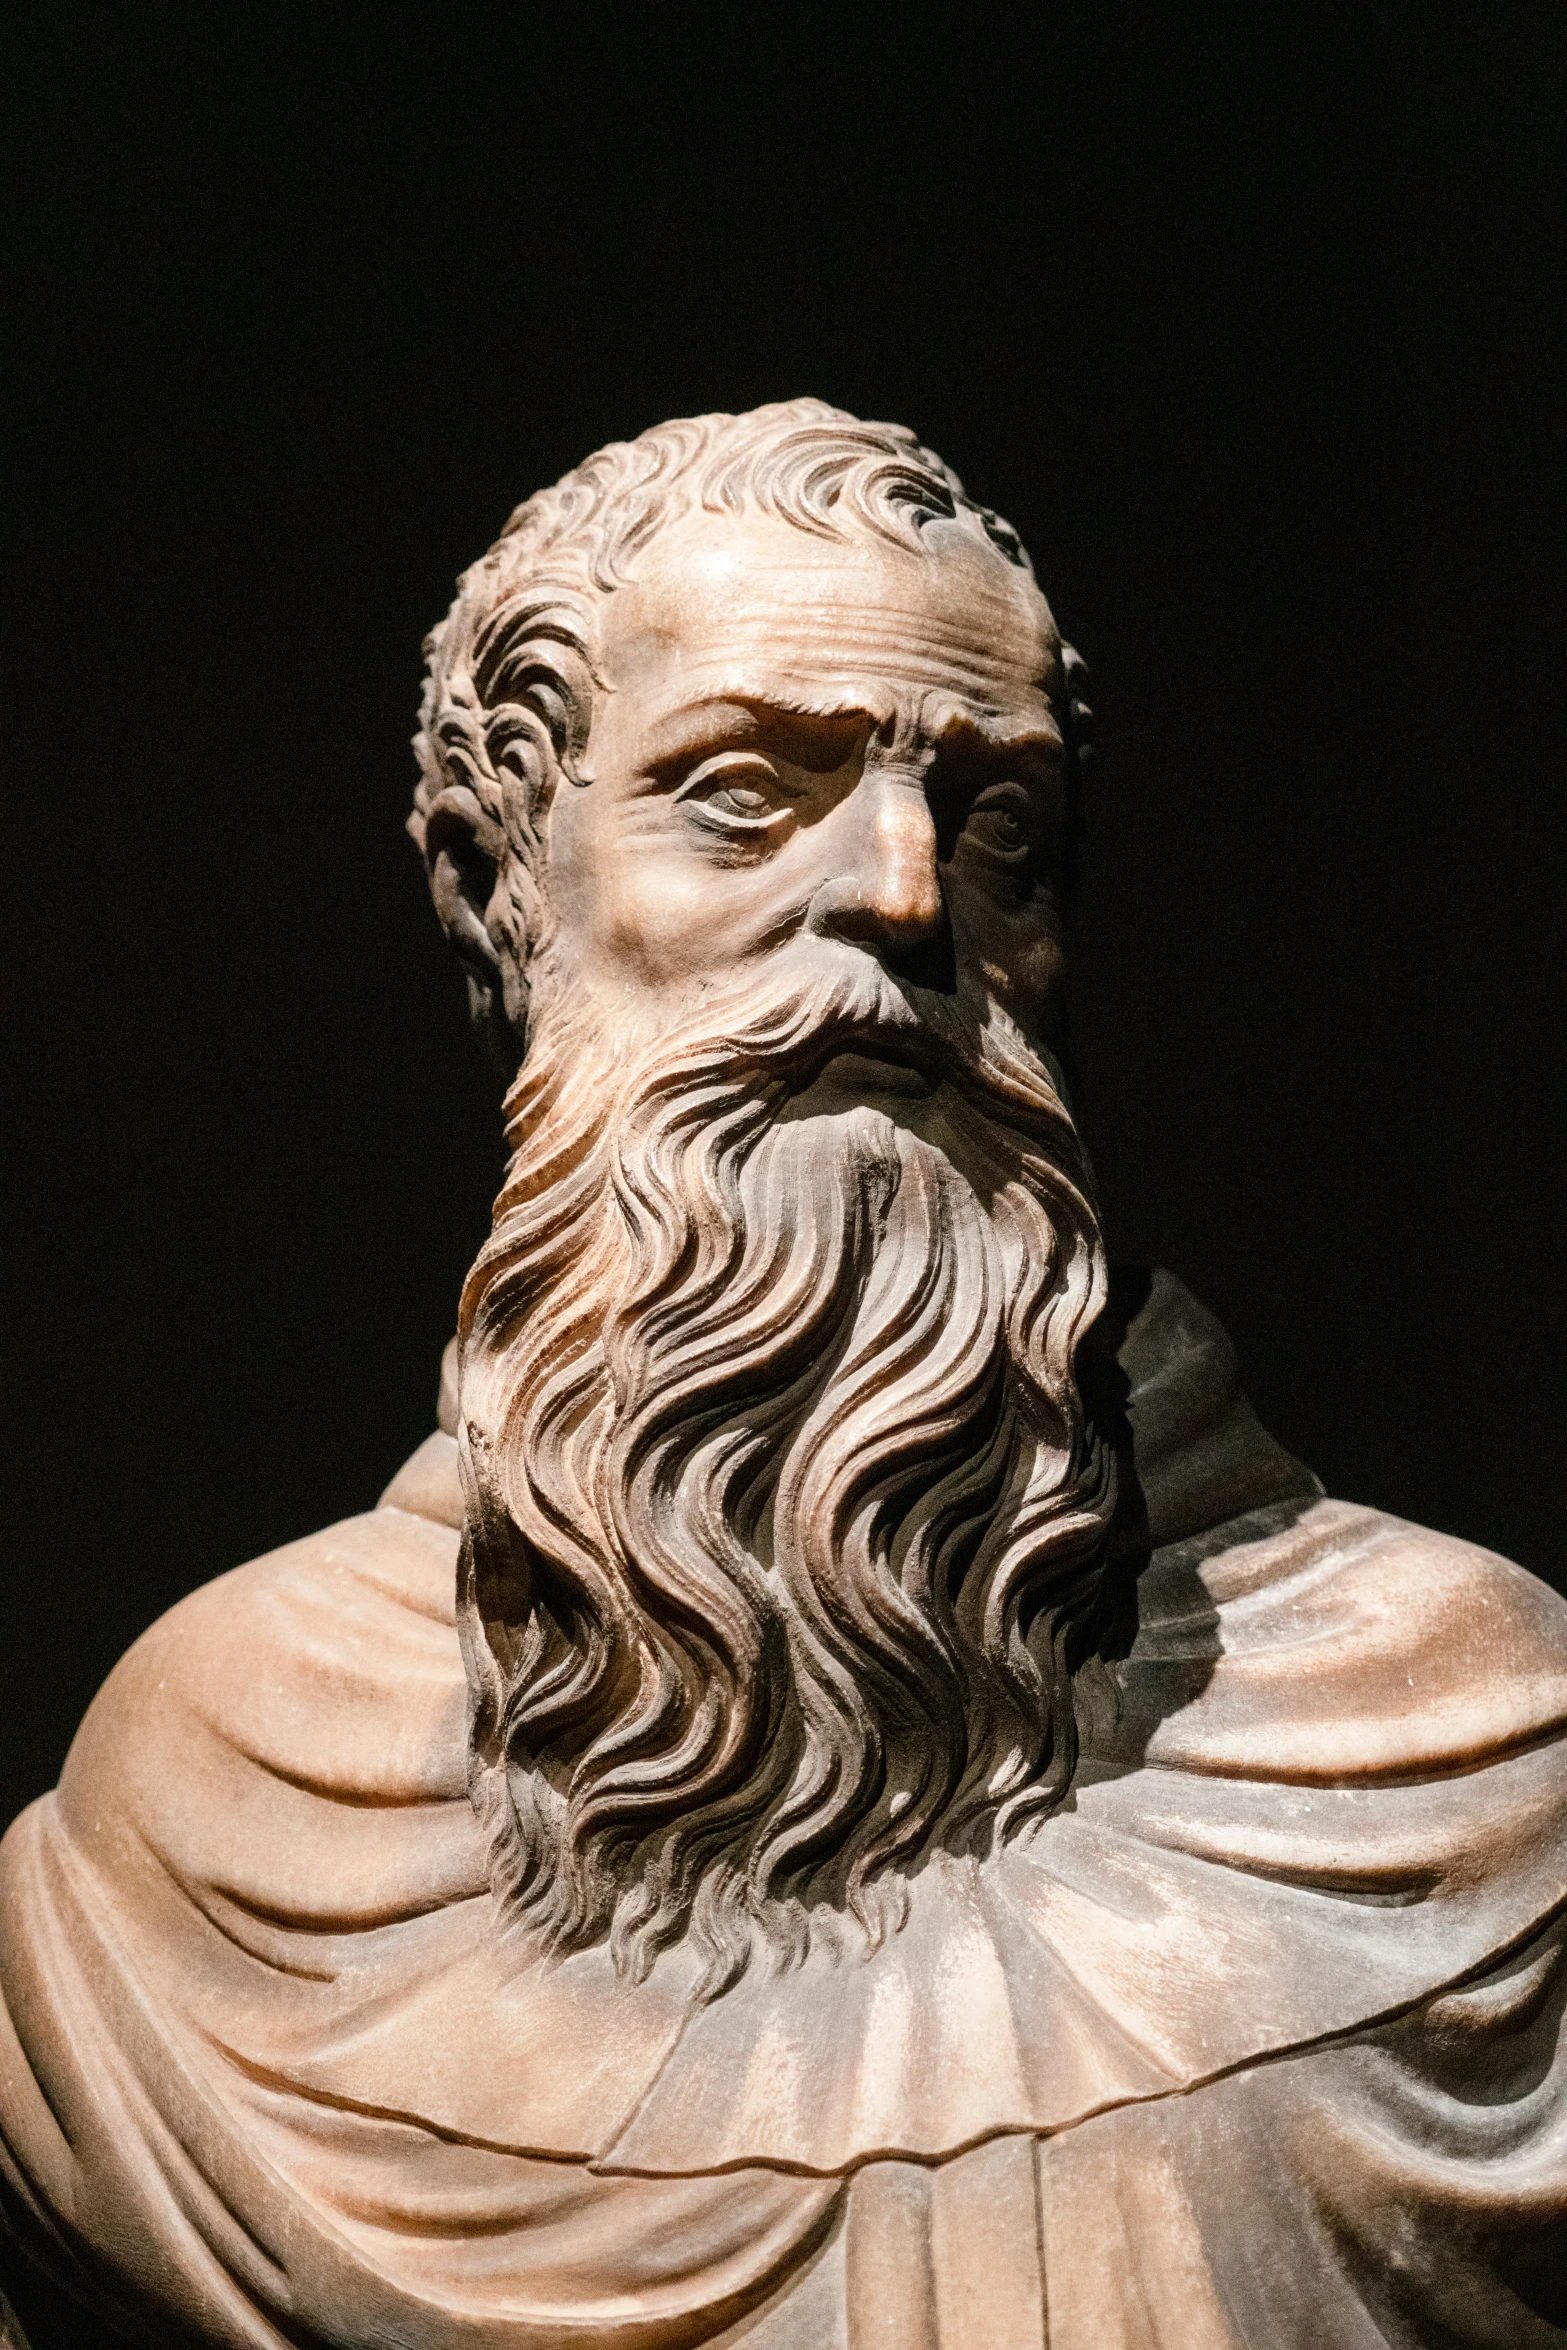 an old statue with long, wavy hair and beard